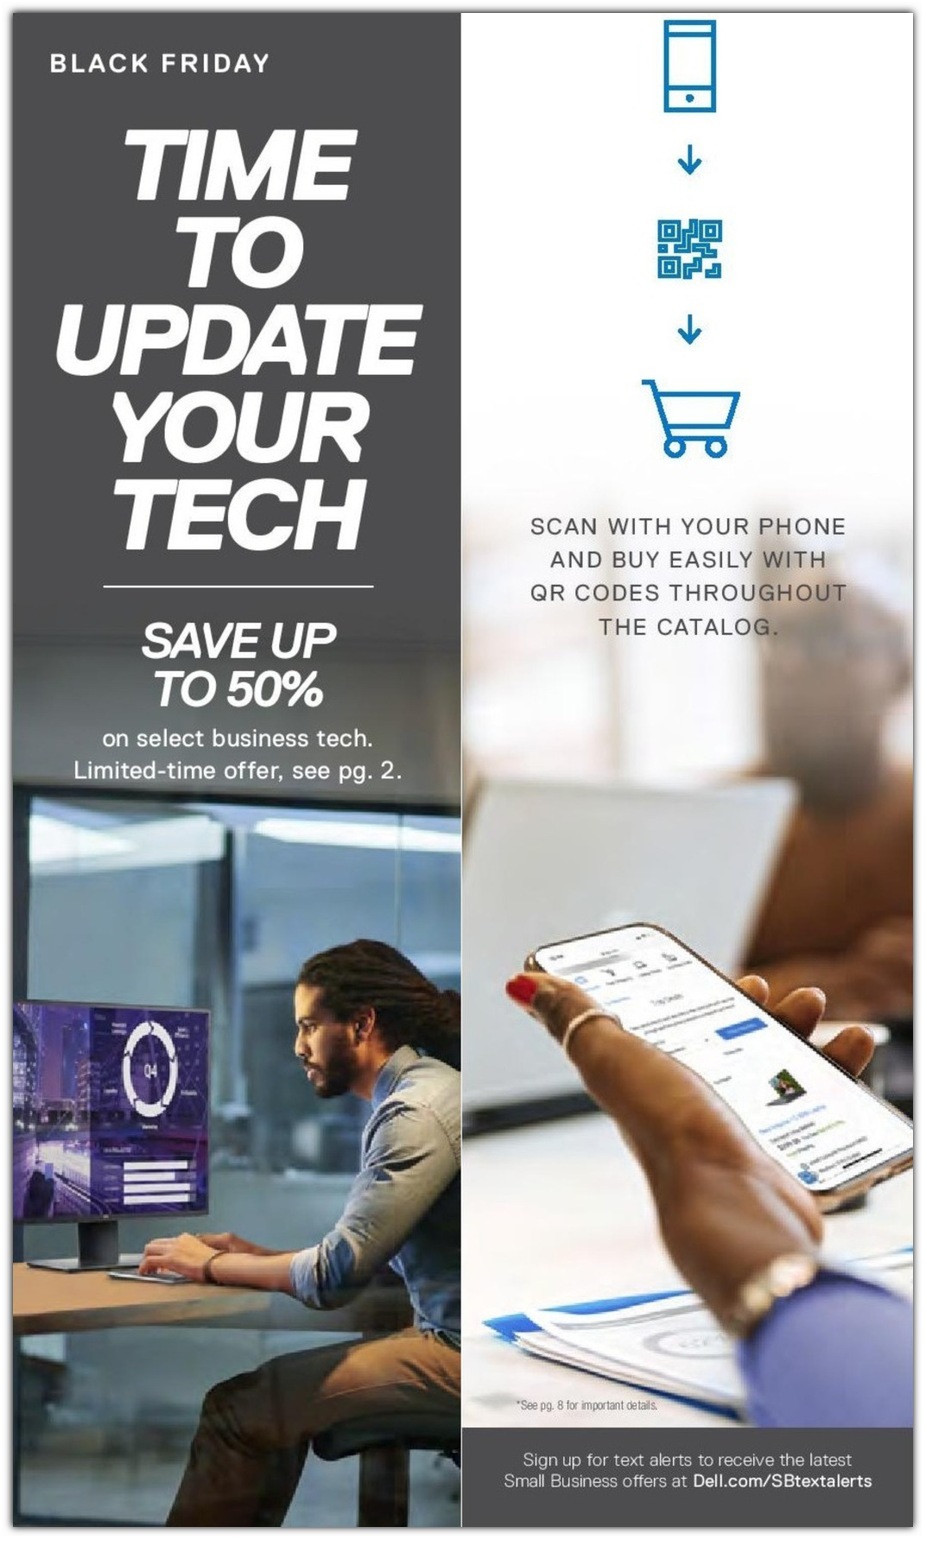 Save up to 50% on Business Tech